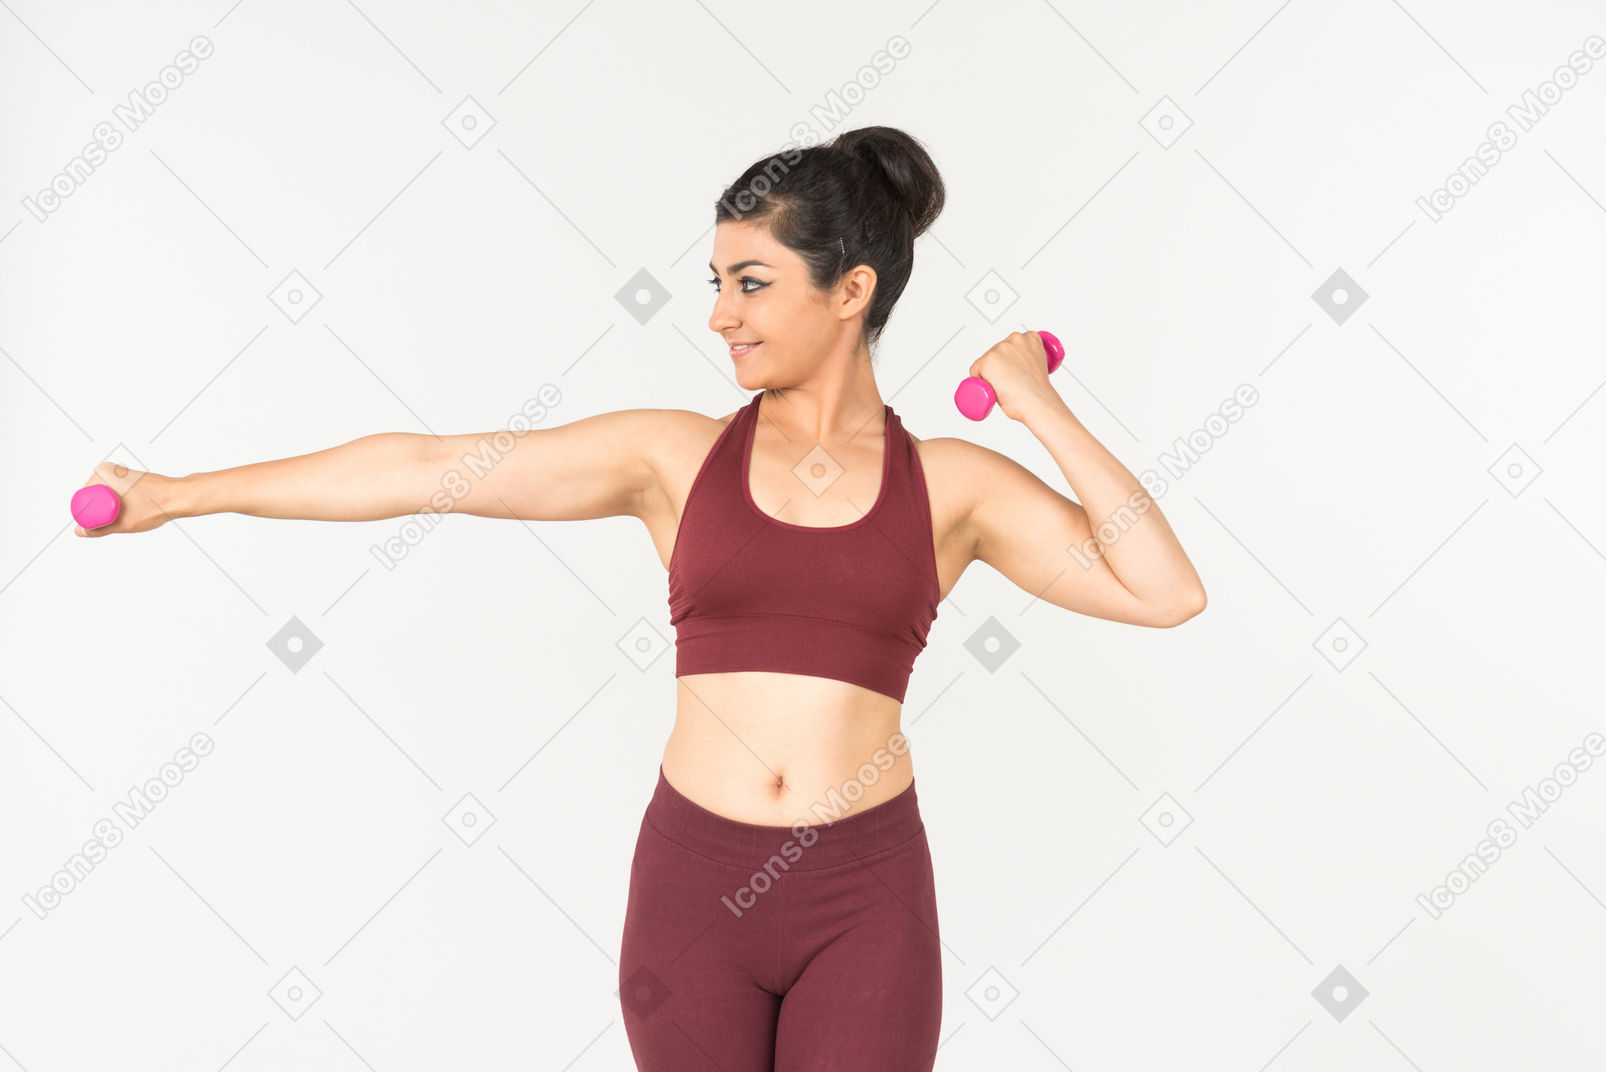 Young indian woman in sportswear holding hand weights and looking aside